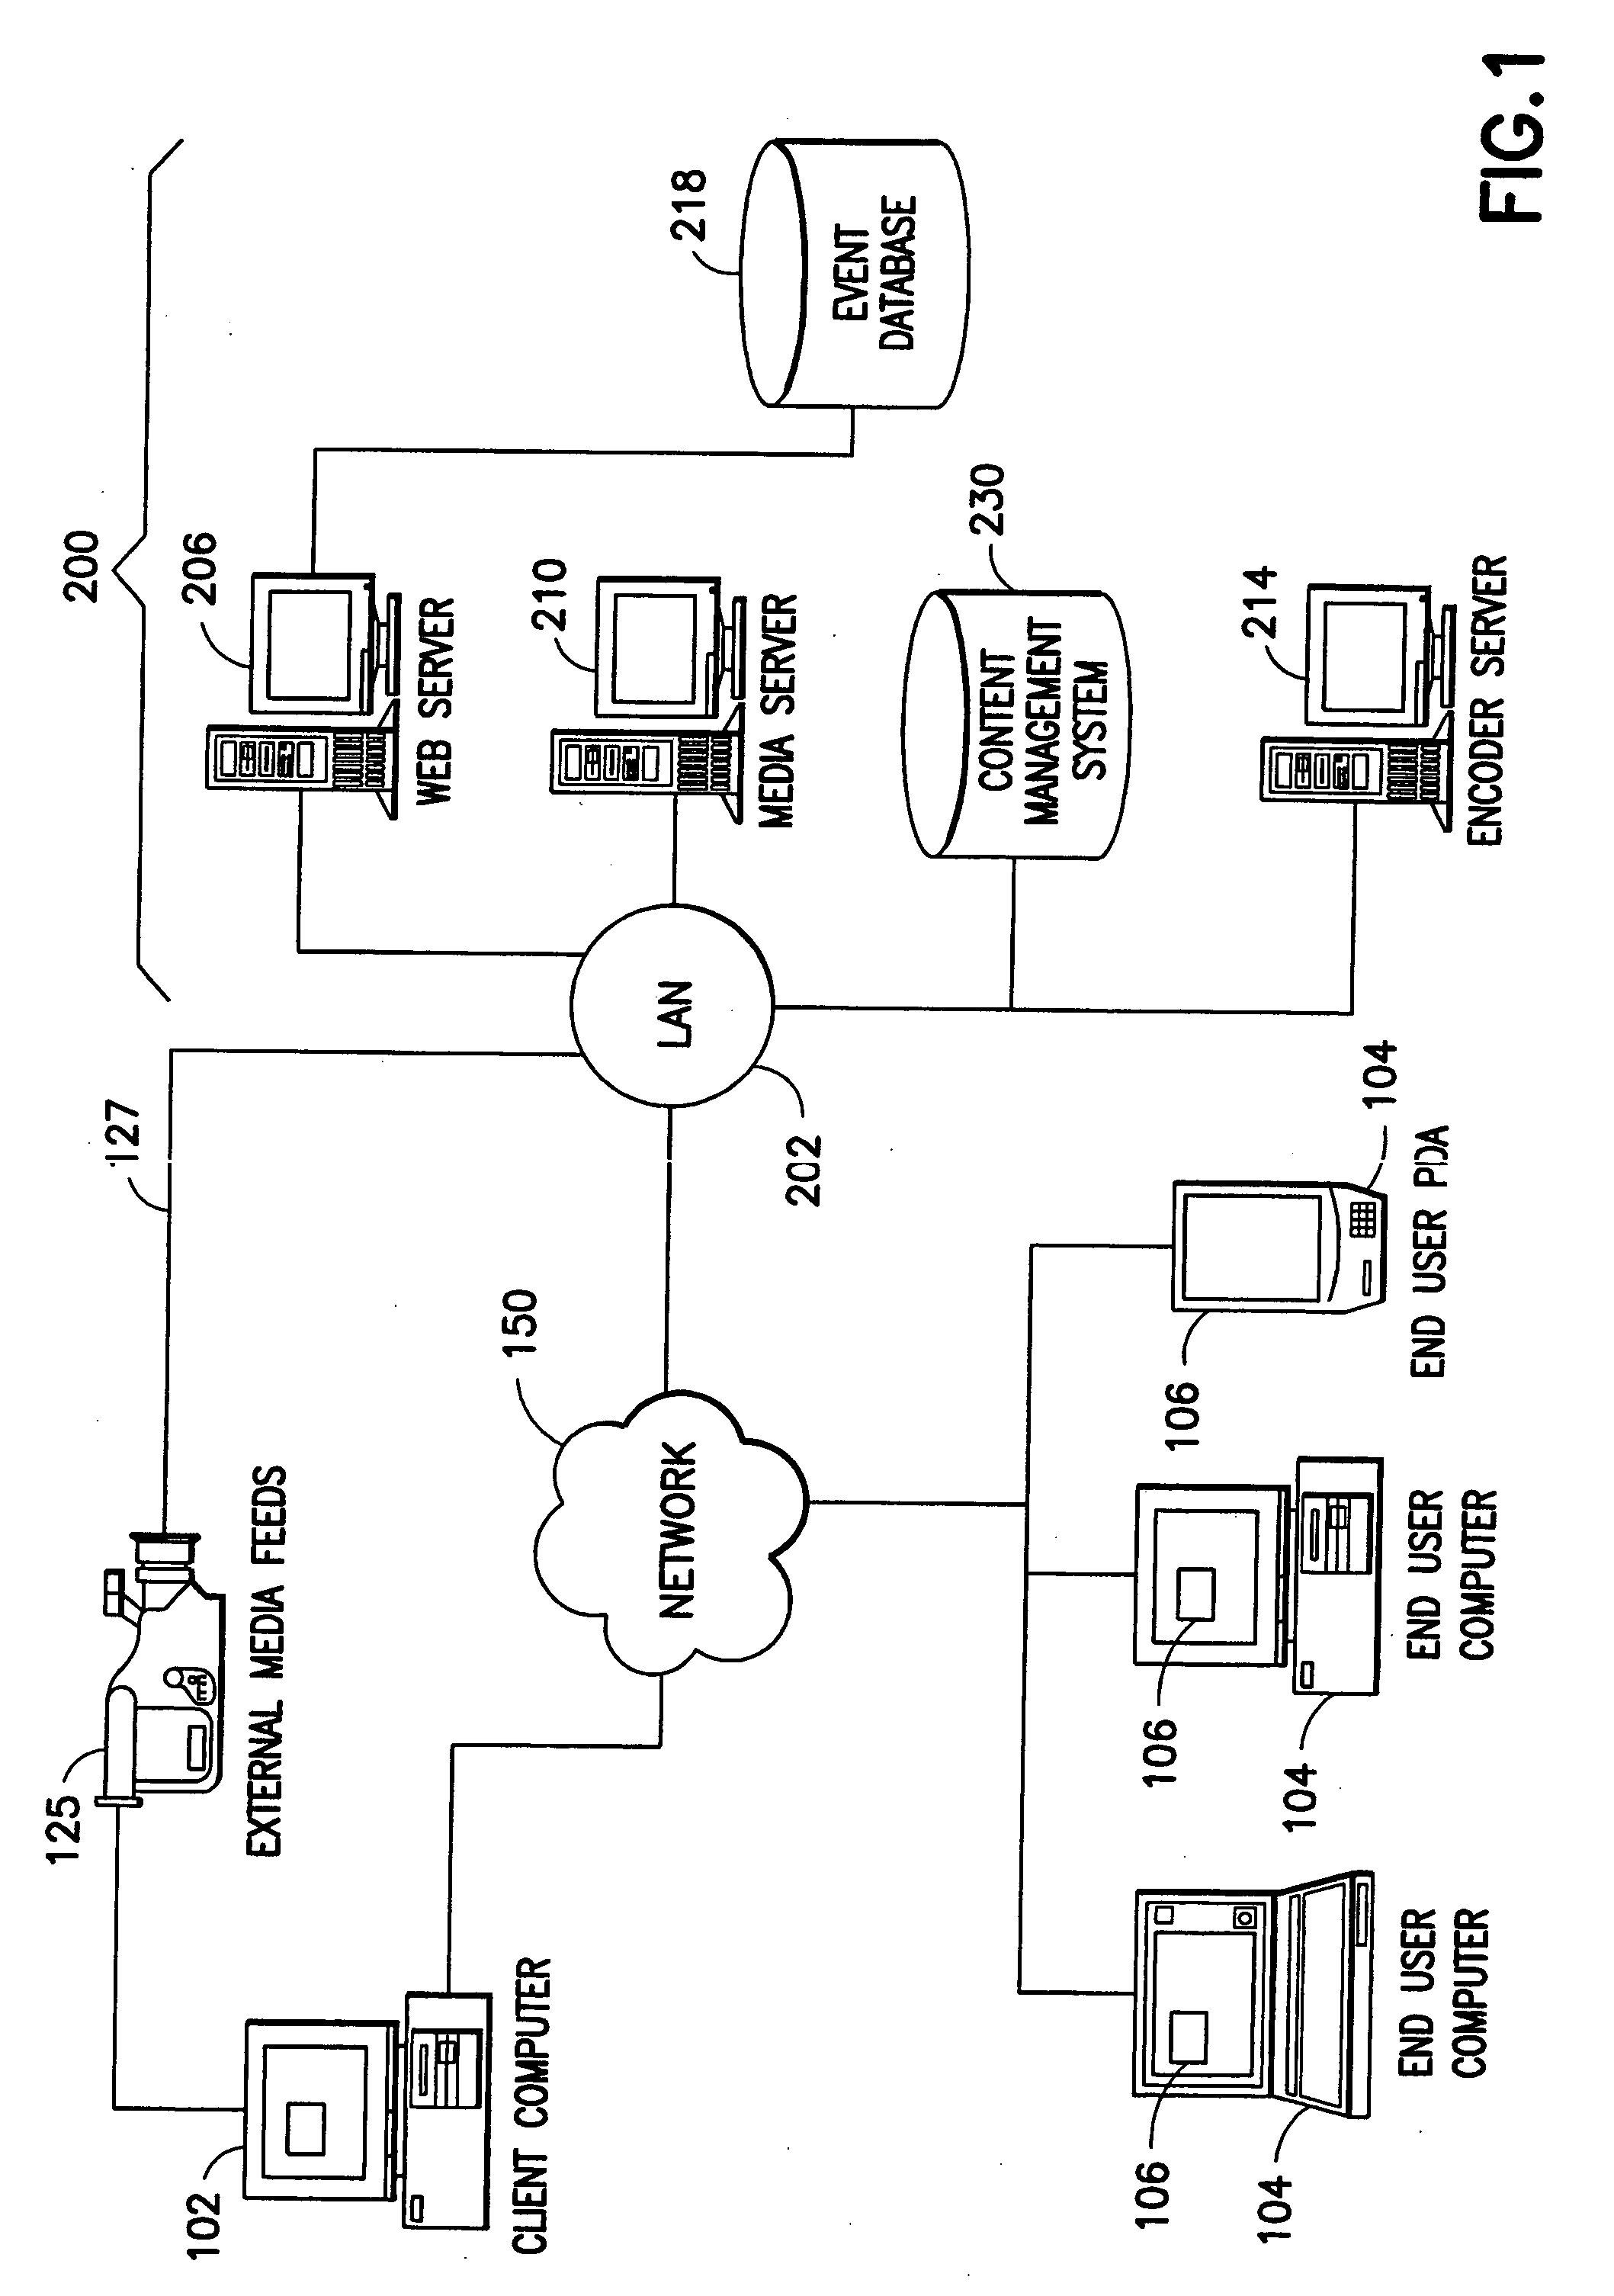 Method and system for producing and administering a web-cast event